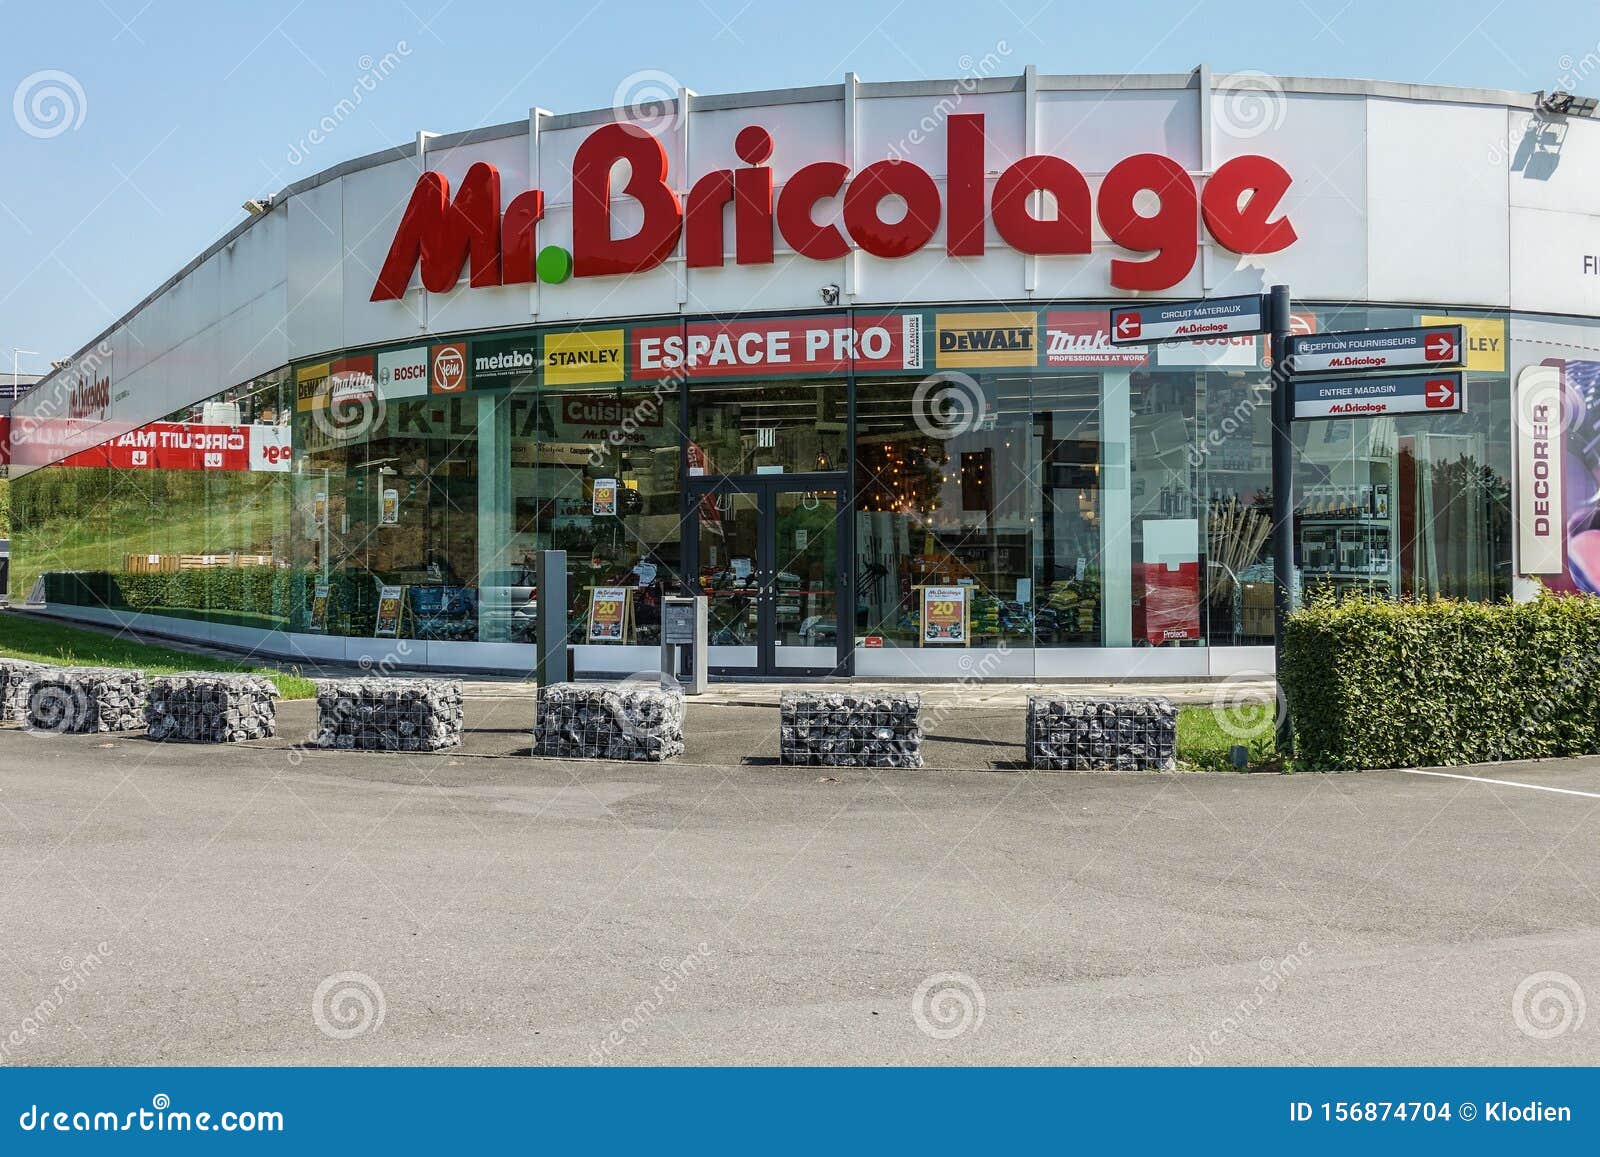 Mr Bricolage Do It Yourself Building Center In Dinant Belgium Editorial Stock Image Image Of Makitta Metabo 156874704